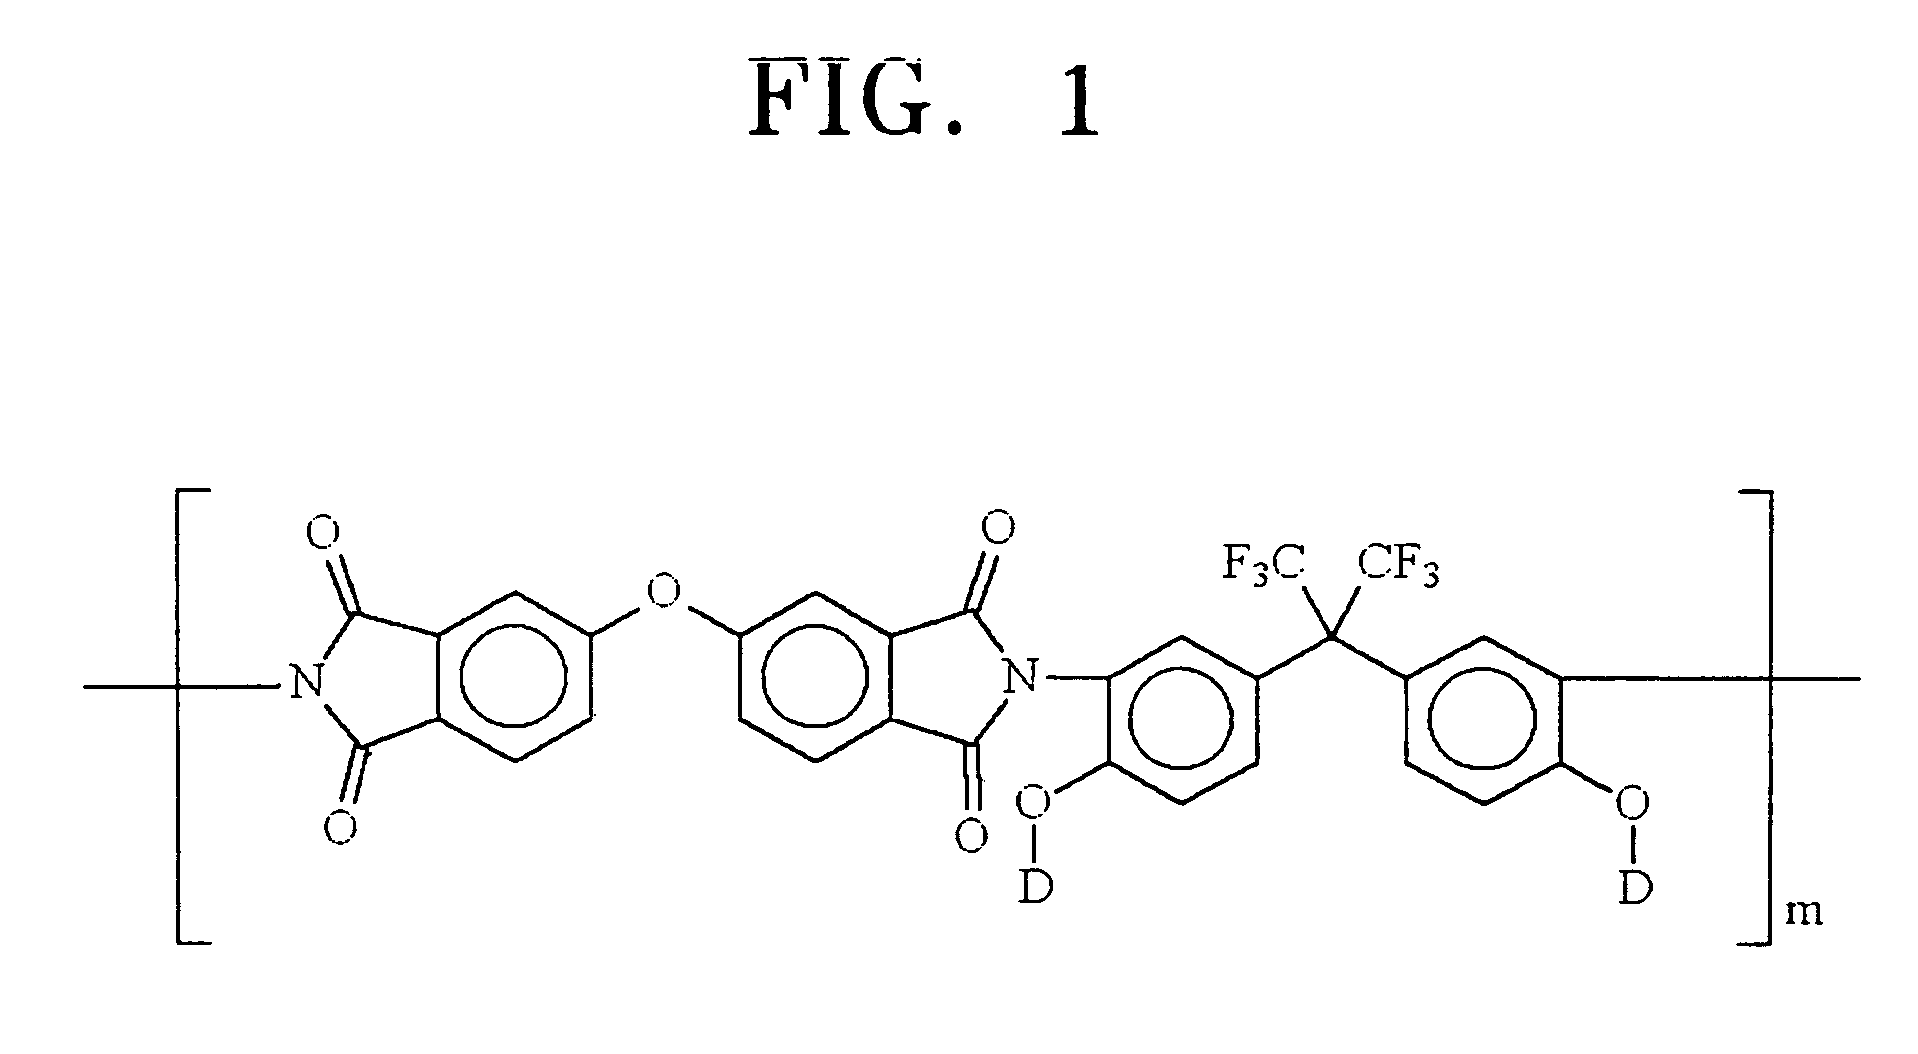 Organic dye molecules and nonlinear optical polymeric compounds containing chromophores